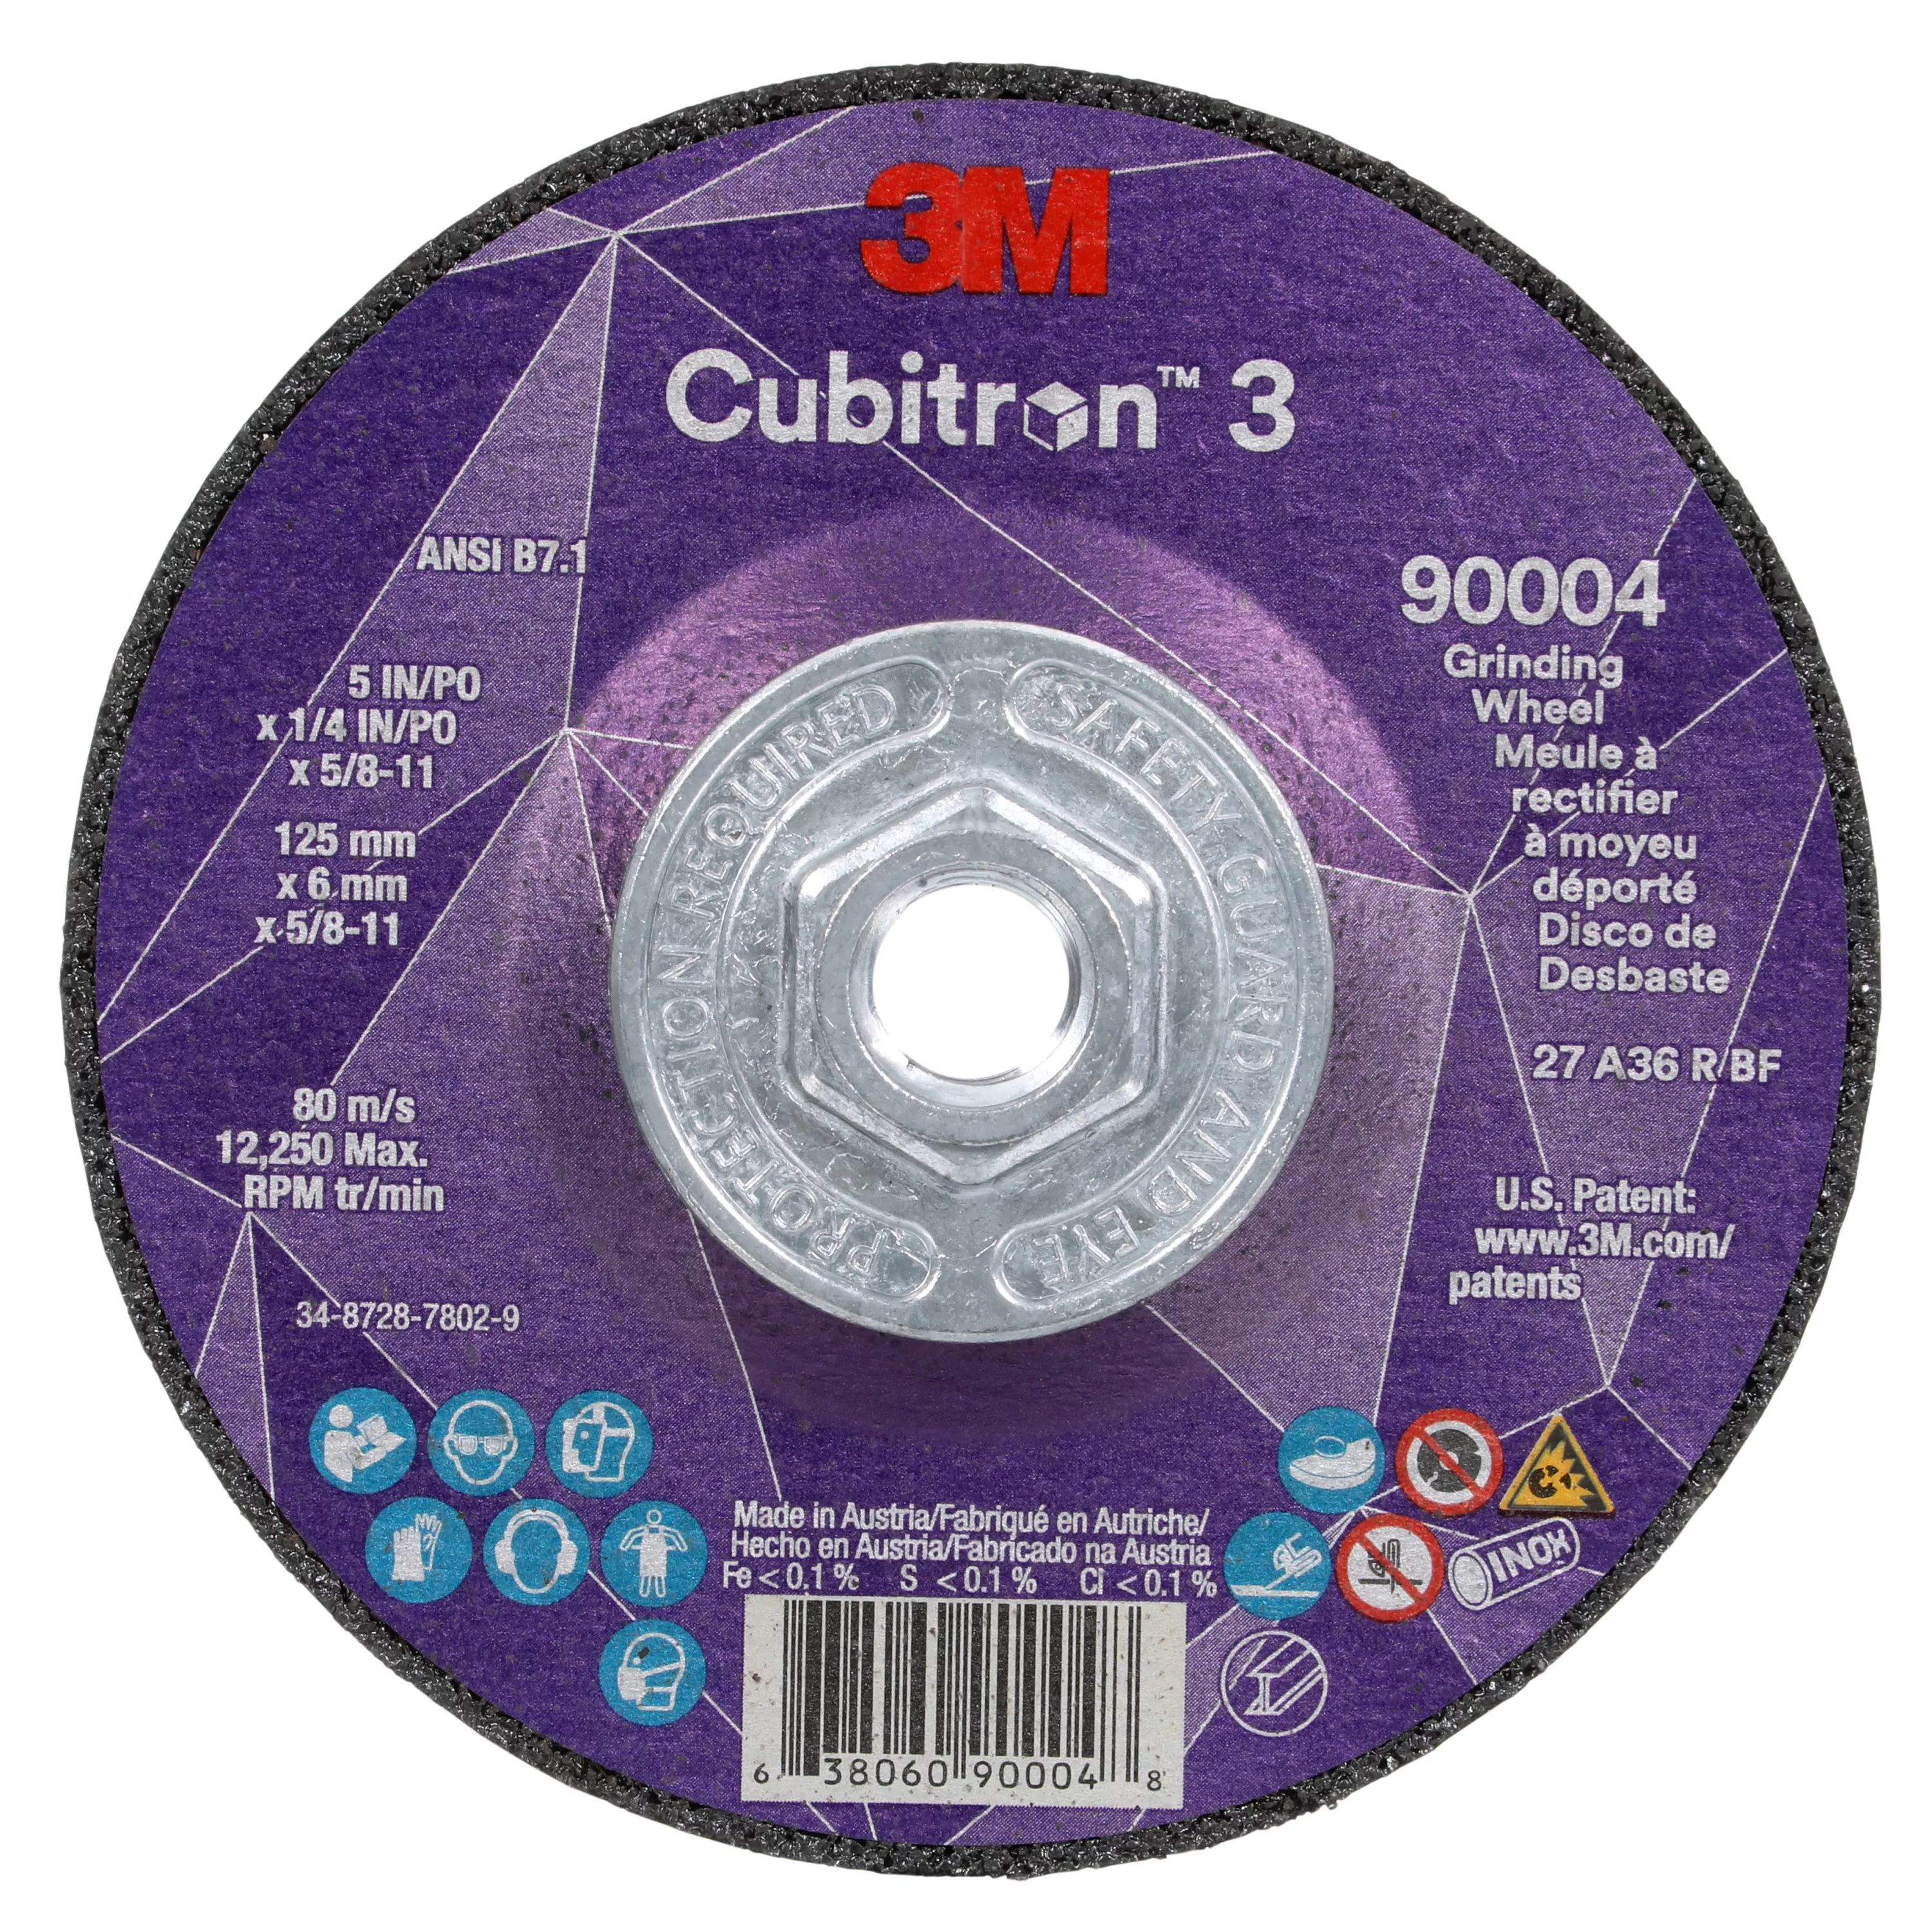 3M™ Cubitron™ 3 Depressed Center Grinding Wheel, 90004, 36+, T27, 5 in x
1/4 in x 5/8 in-11 (125x6mmx5/8-11in), ANSI, 10 ea/Case